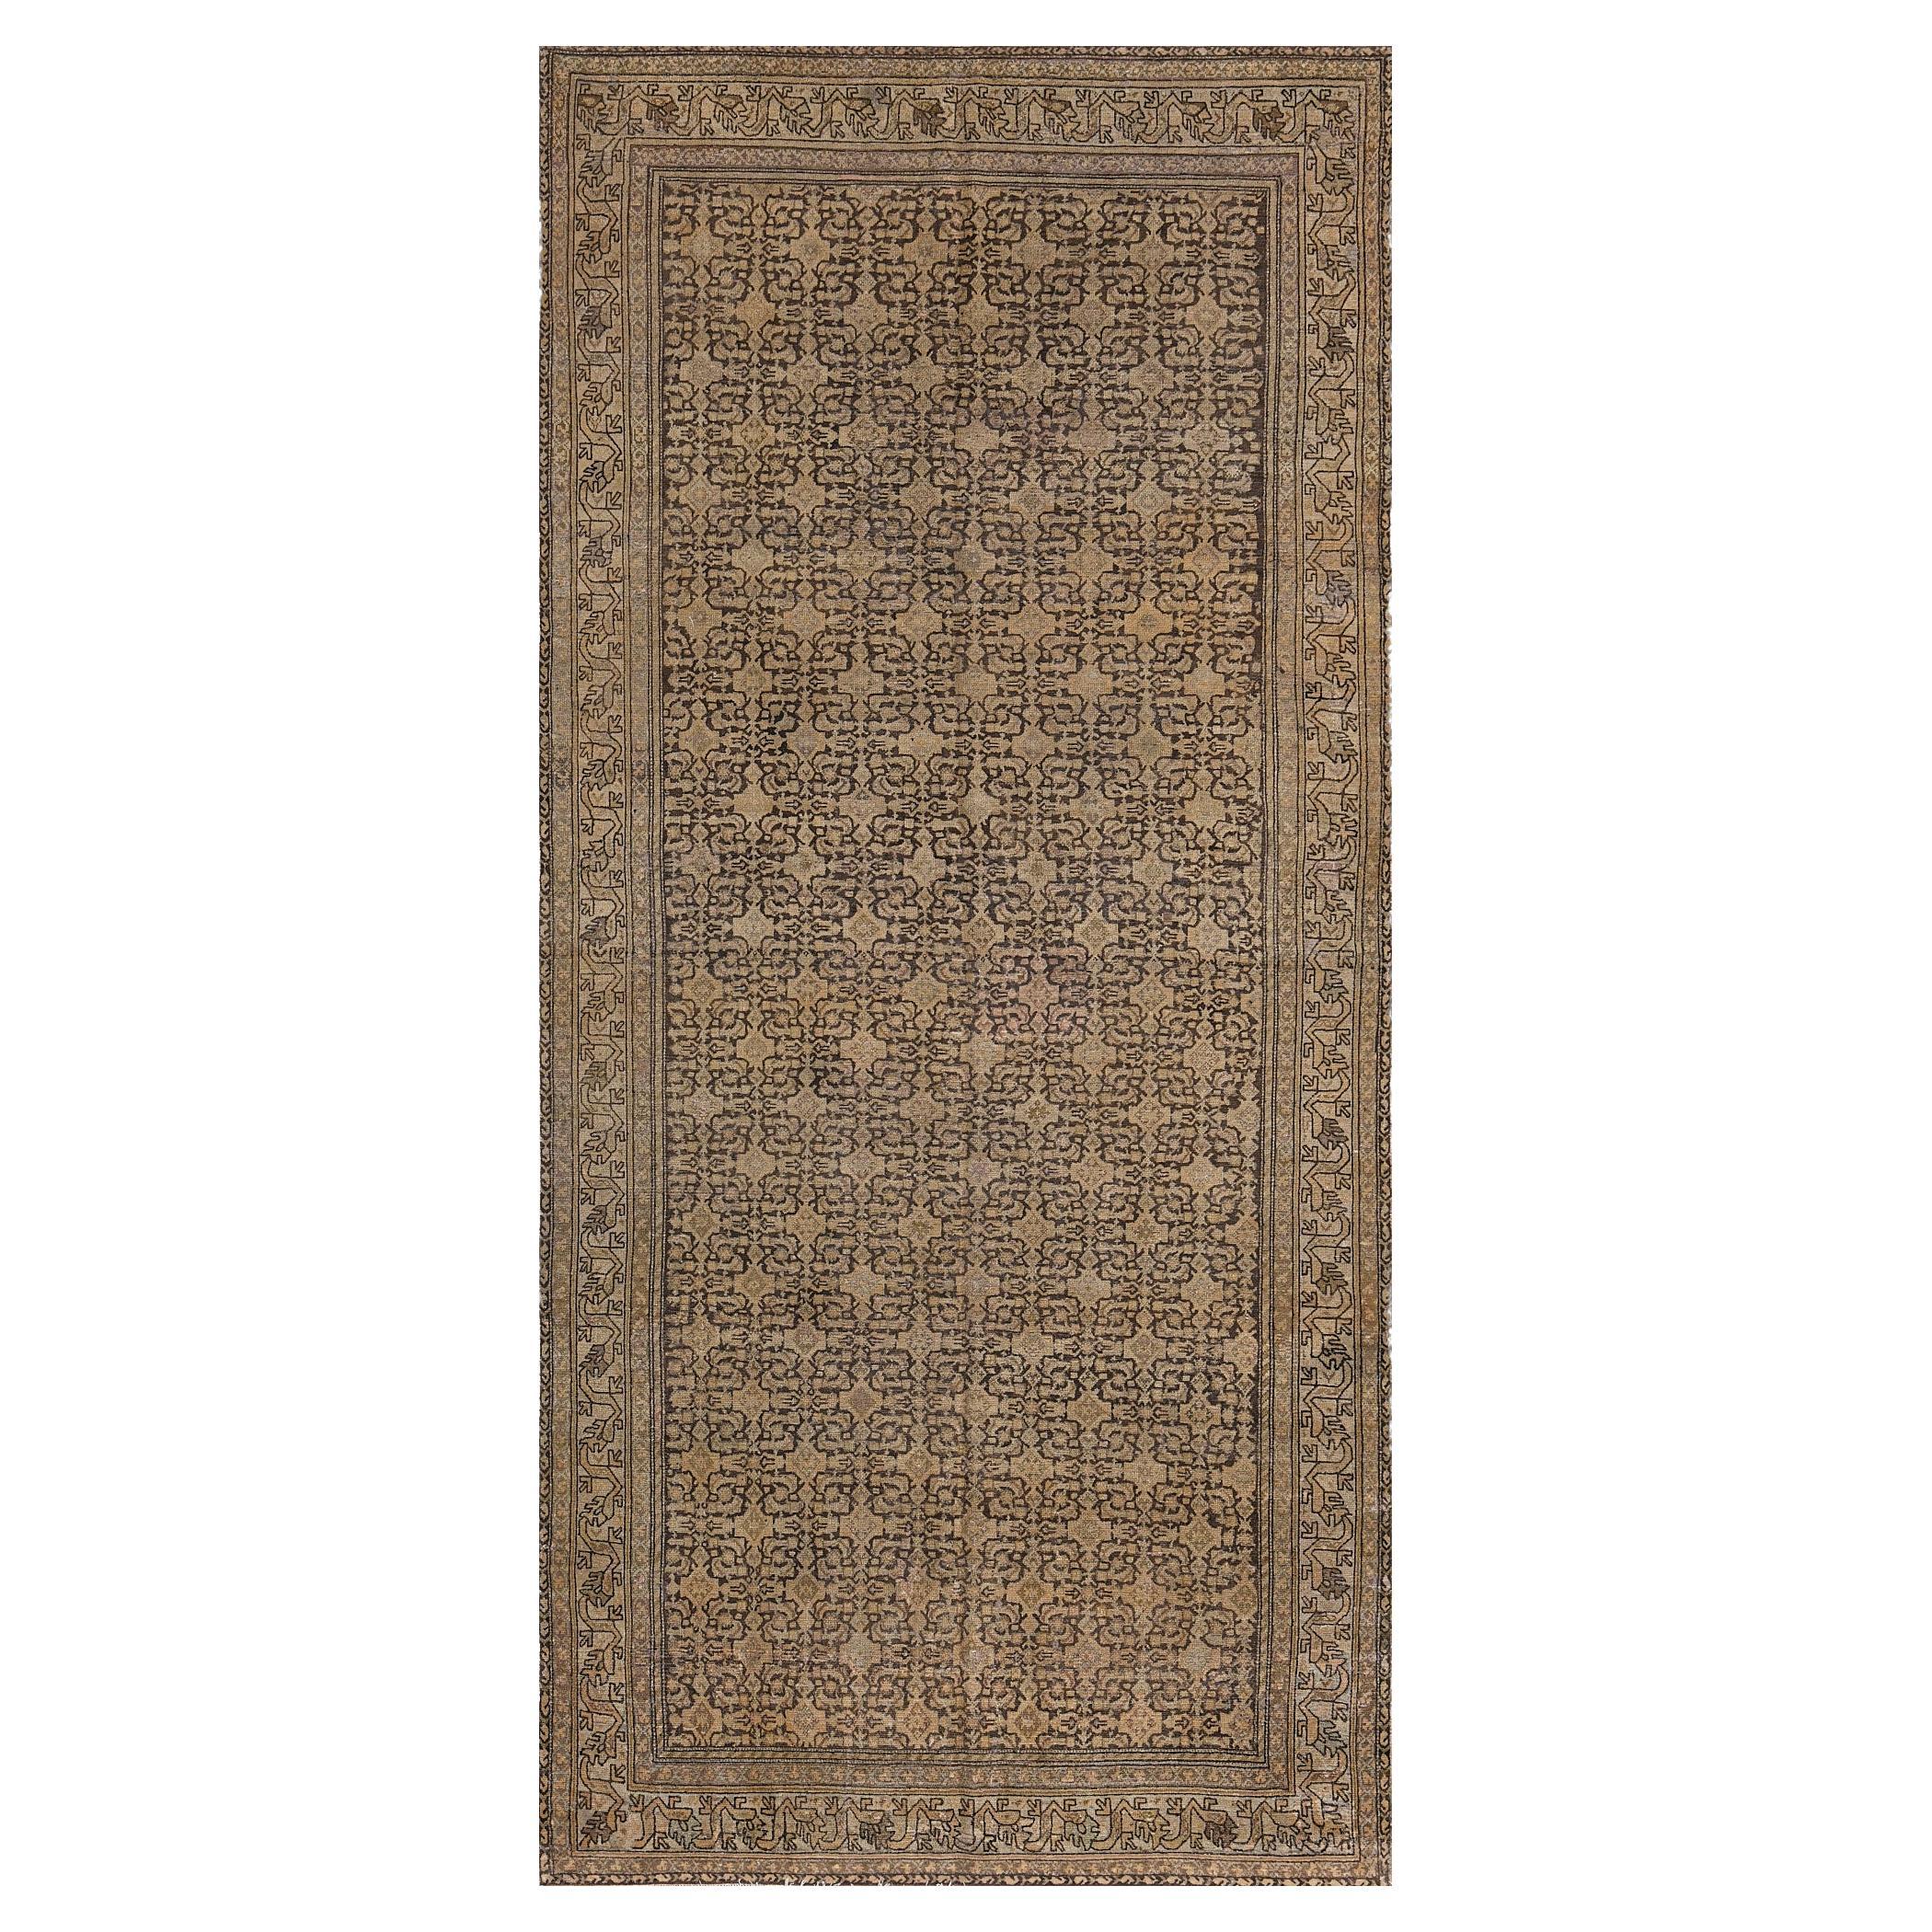 Antique Hand-Knotted Wool Persian Malayer Rug